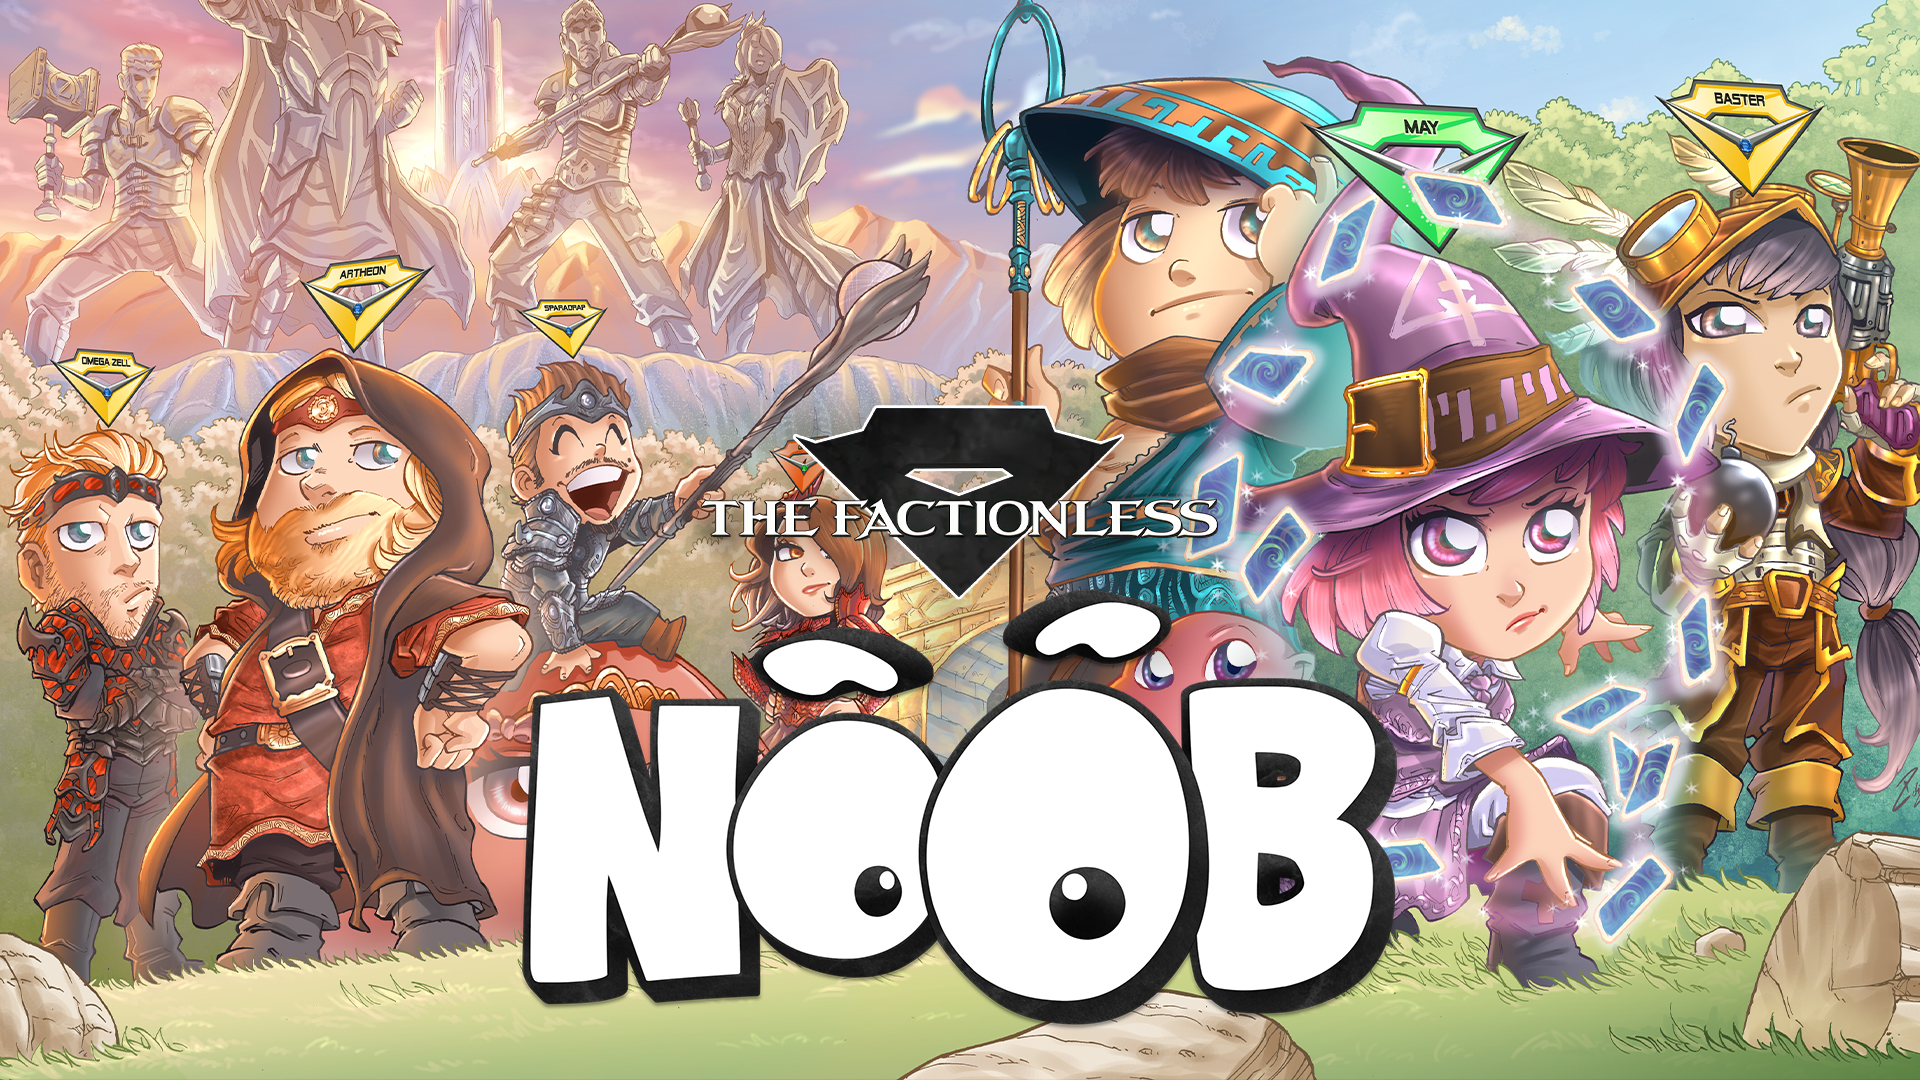 download the new version for mac NOOB - The Factionless